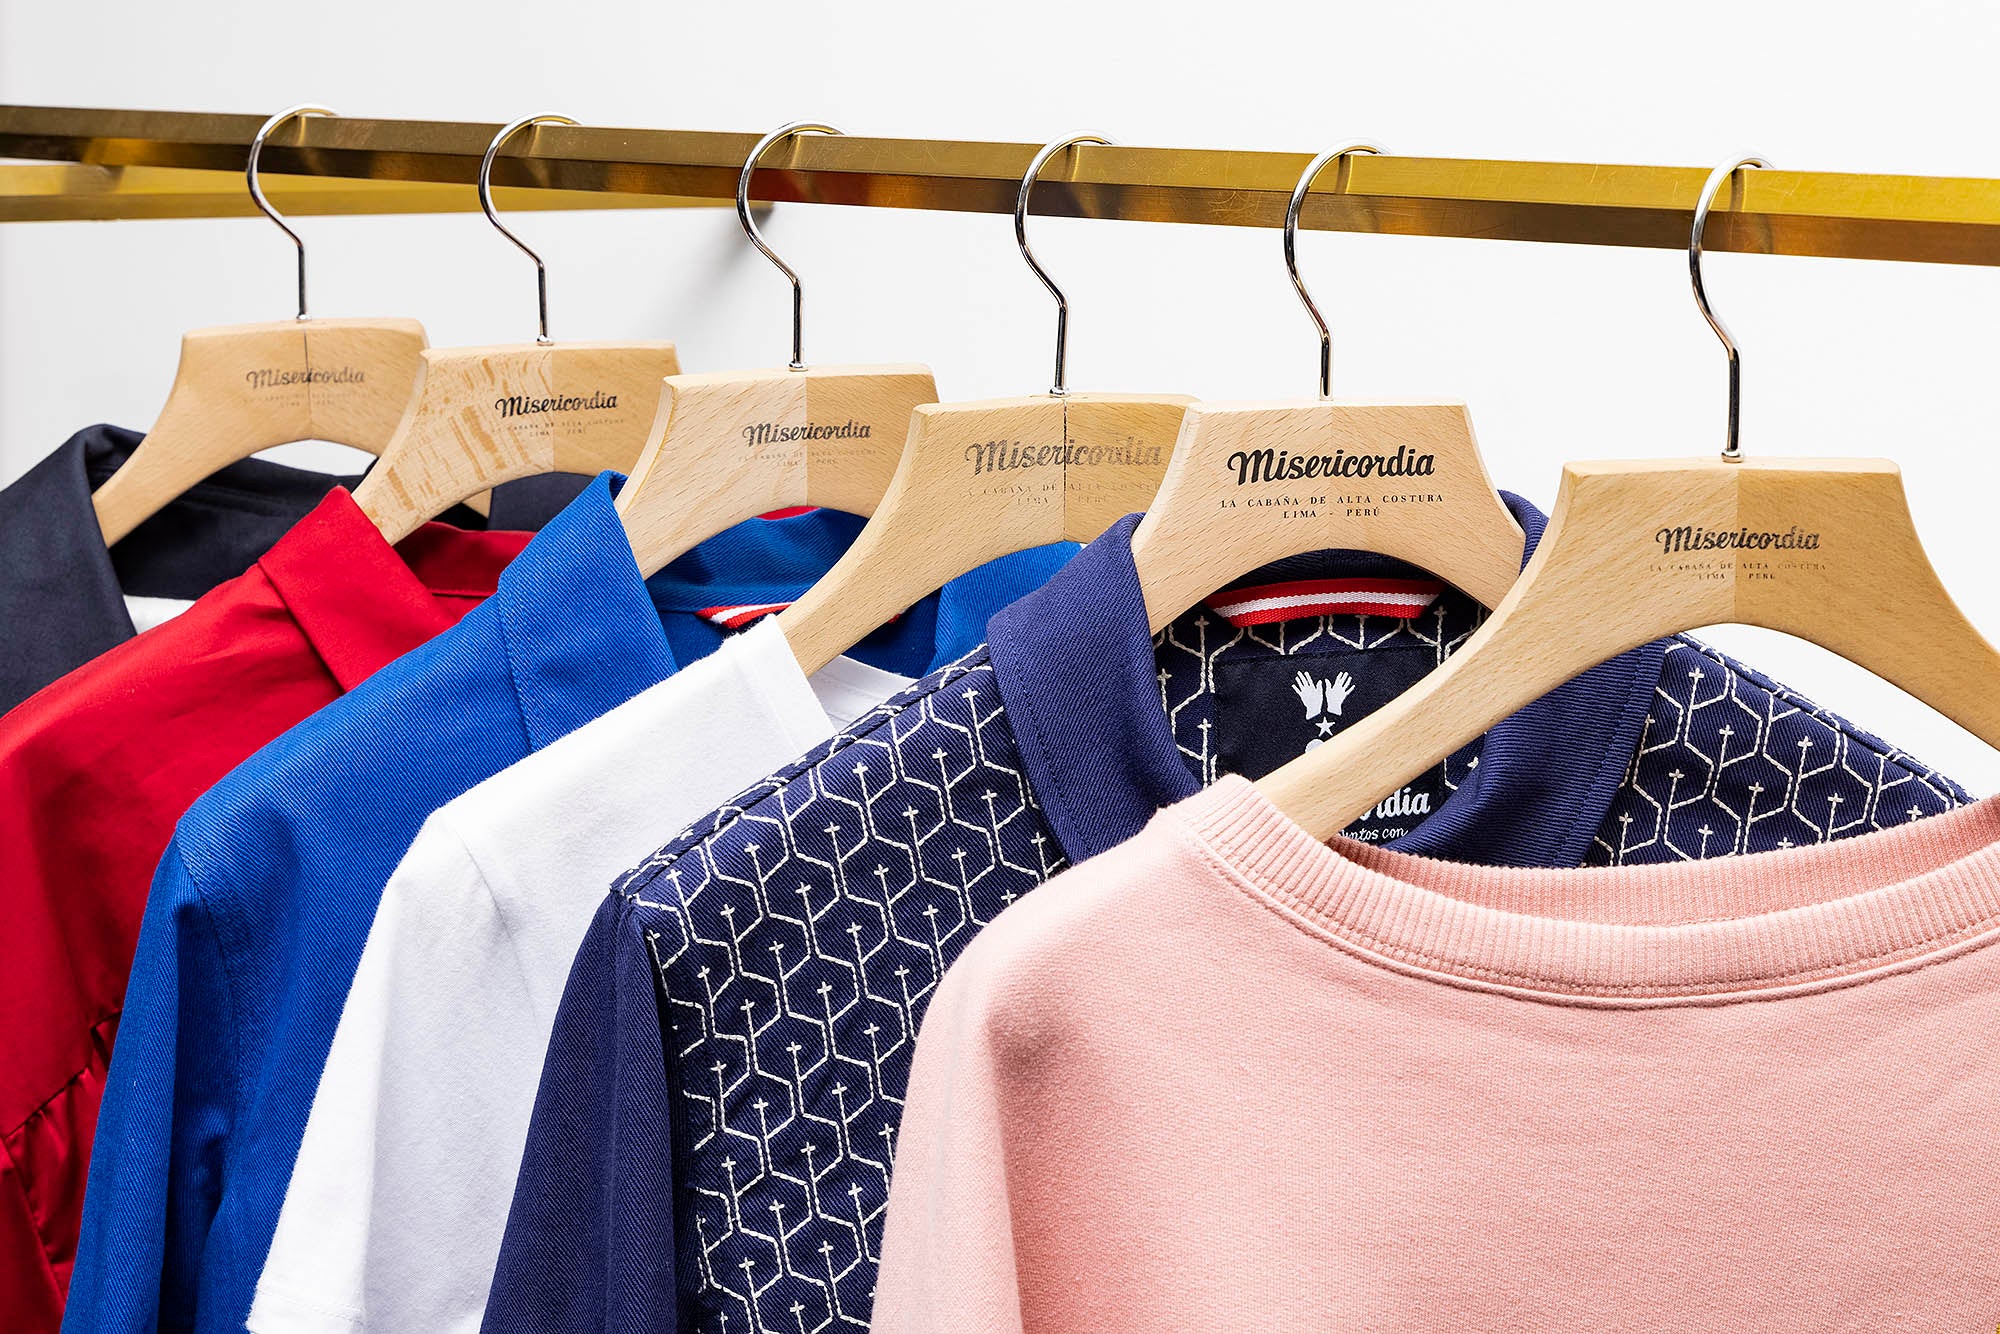 photography of the misericordia clothing store on hangers and on a white background lima peru